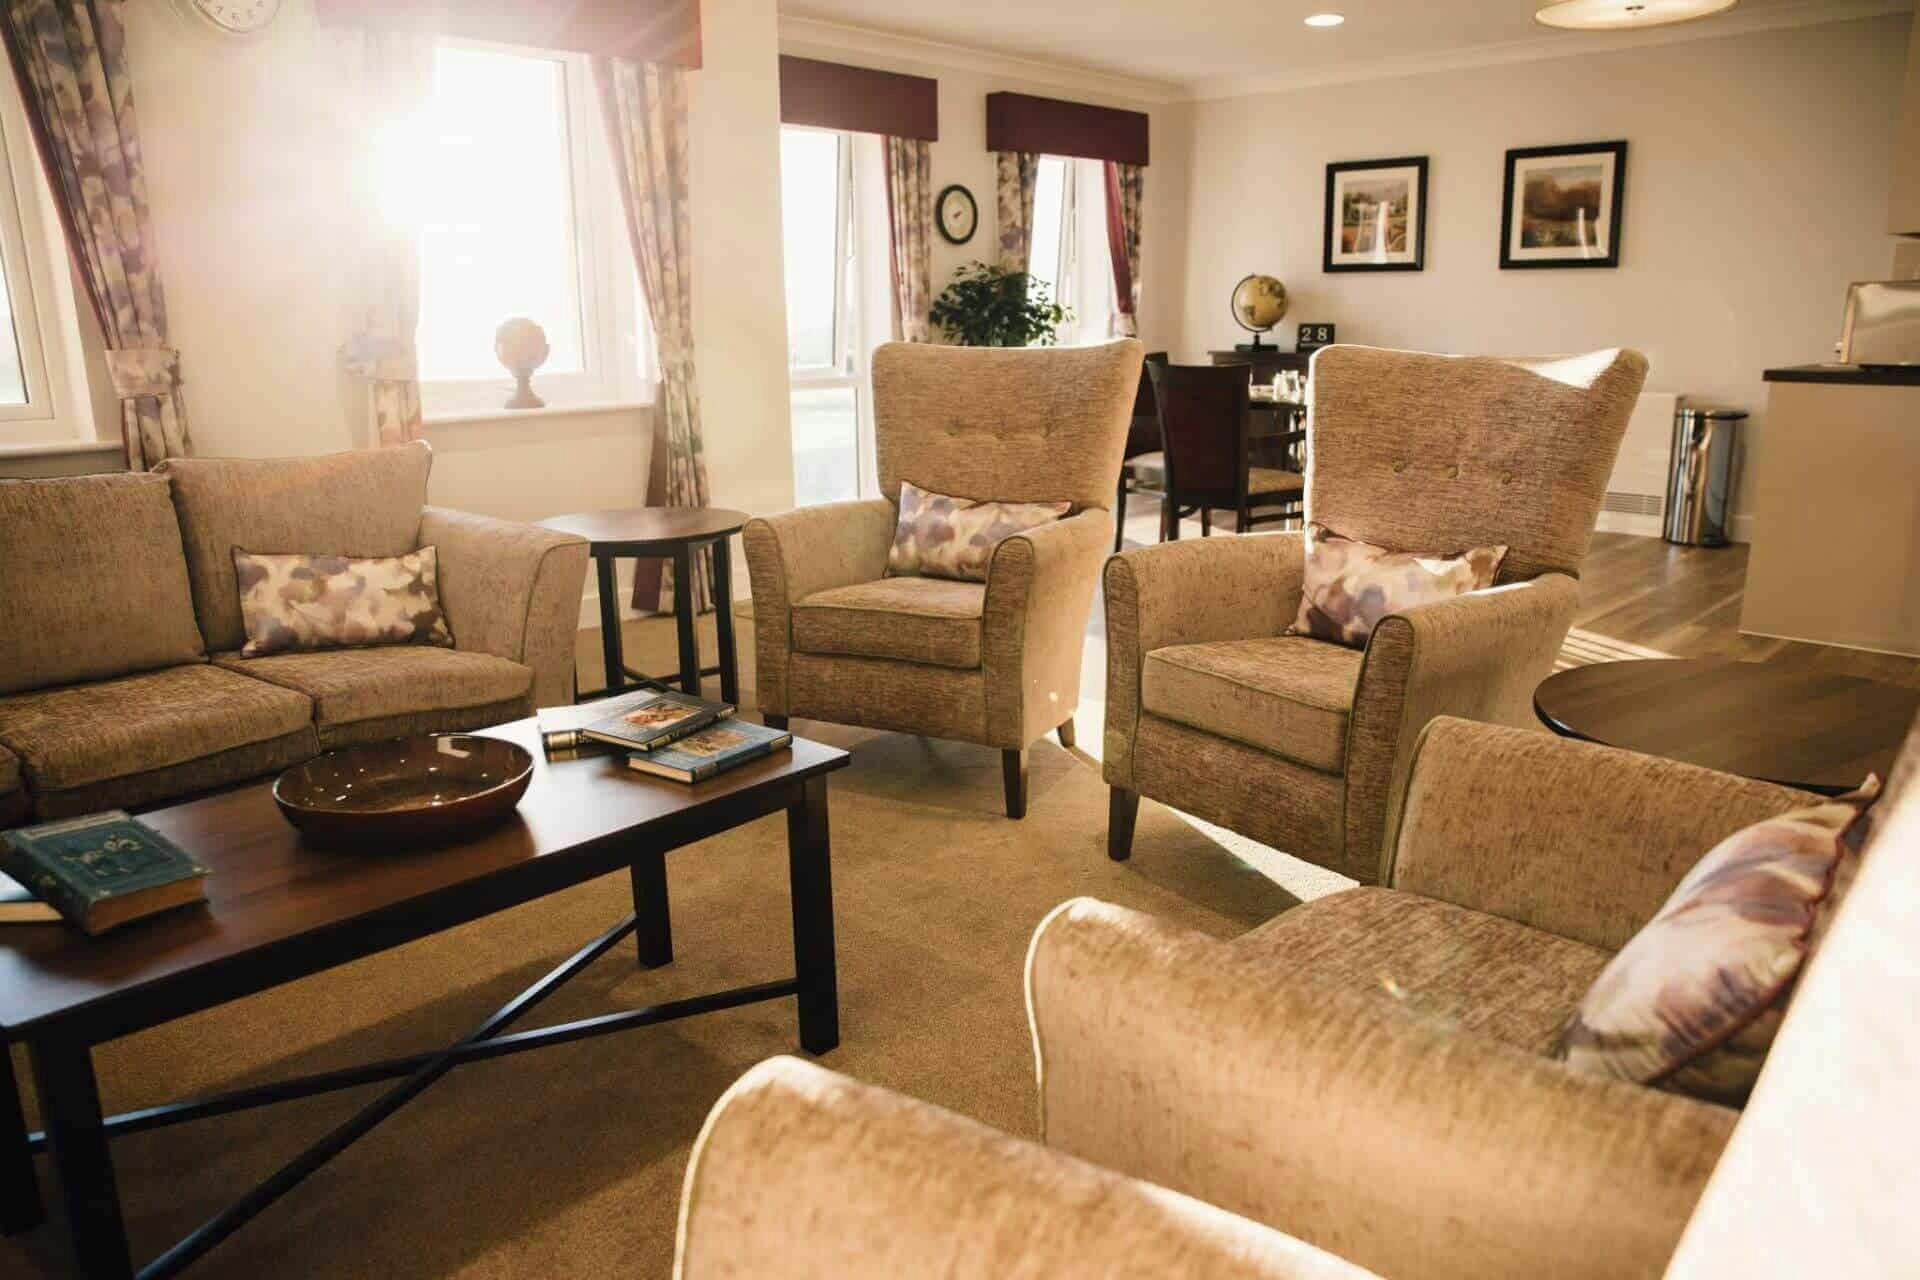 The lounge area at Wellington Vale Care Home in Portsmouth, Hampshire